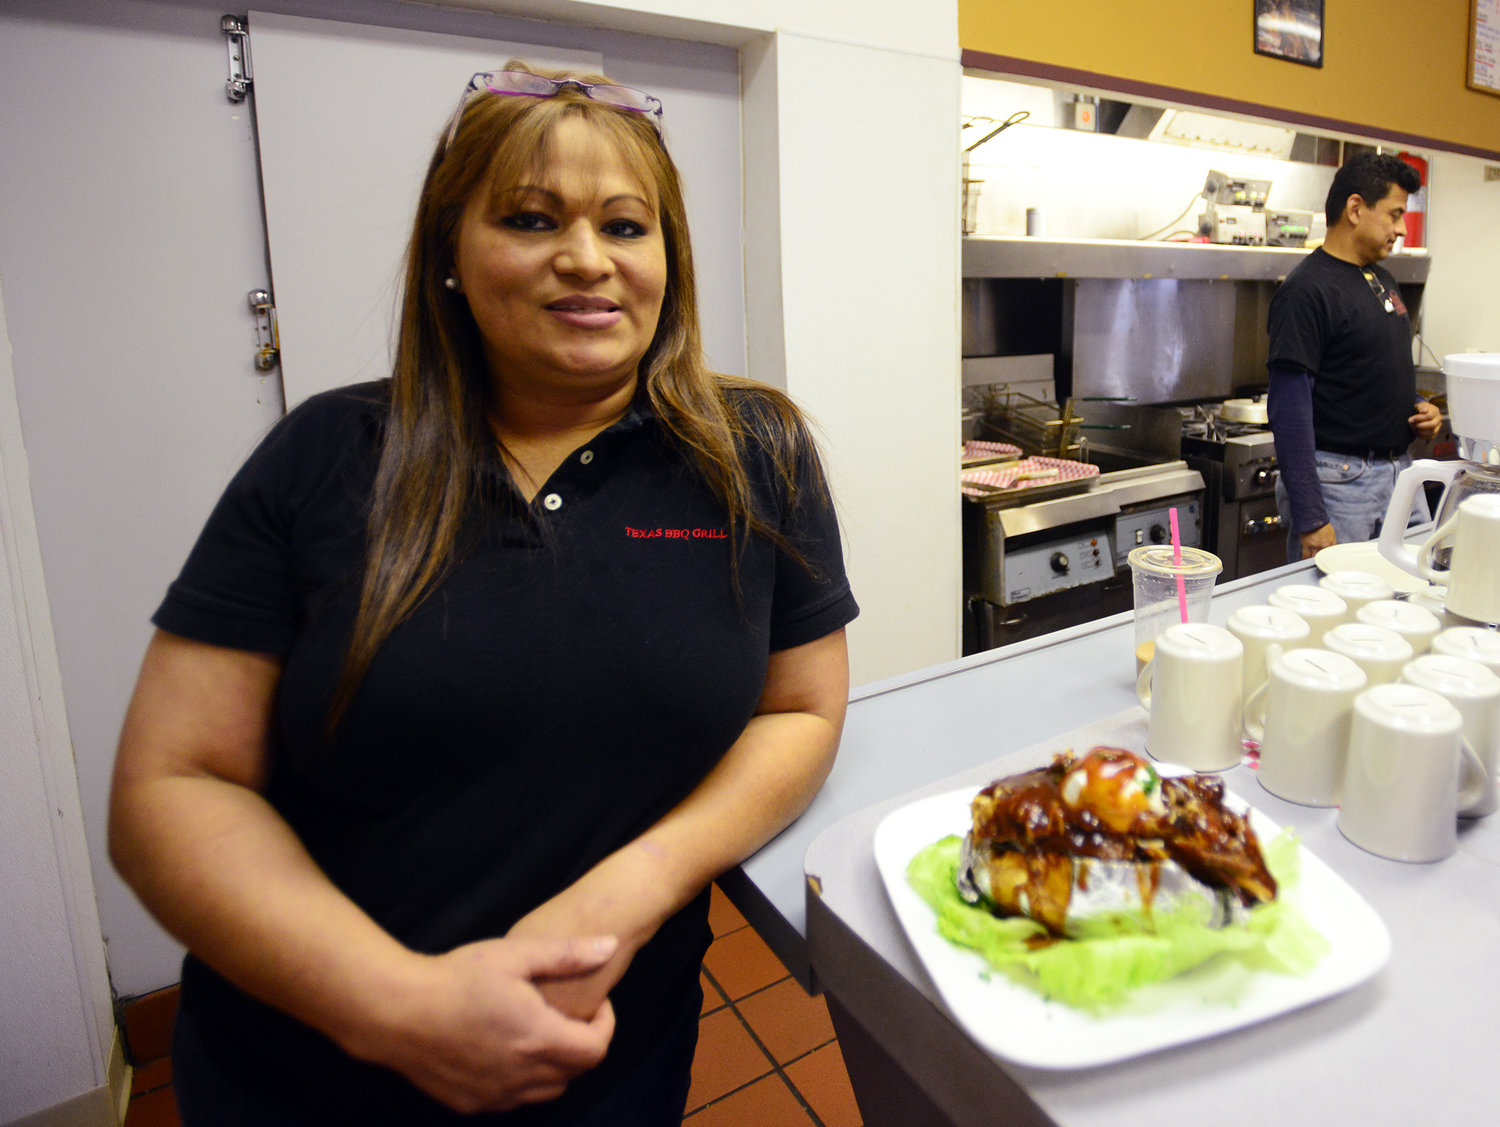 Brenda Salgado, owner of Texas BBQ Grill, leans against the counter next to her signature dish, the Terrific Tater, on Monday afternoon at the restaurant in Chehalis.